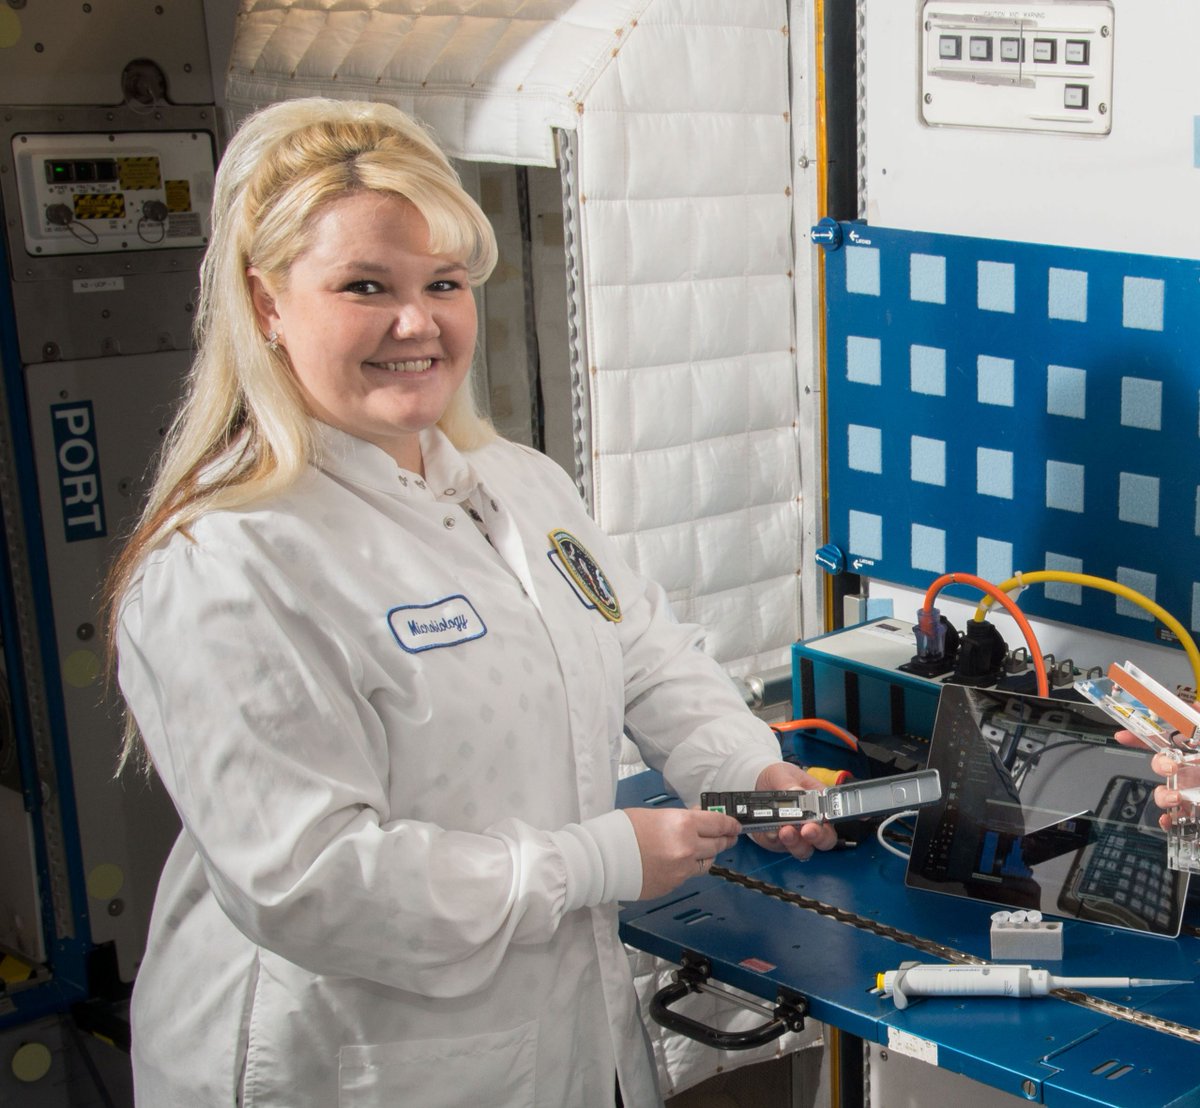 Sarah Wallace works at JSC researching microbes in space! #WomensHistoryMonth As a microbiologist, she helps keep @Space_Station crews safe, ensures we don’t carry harmful microbes to other planets, and participates in science outreach at places like her alma mater.